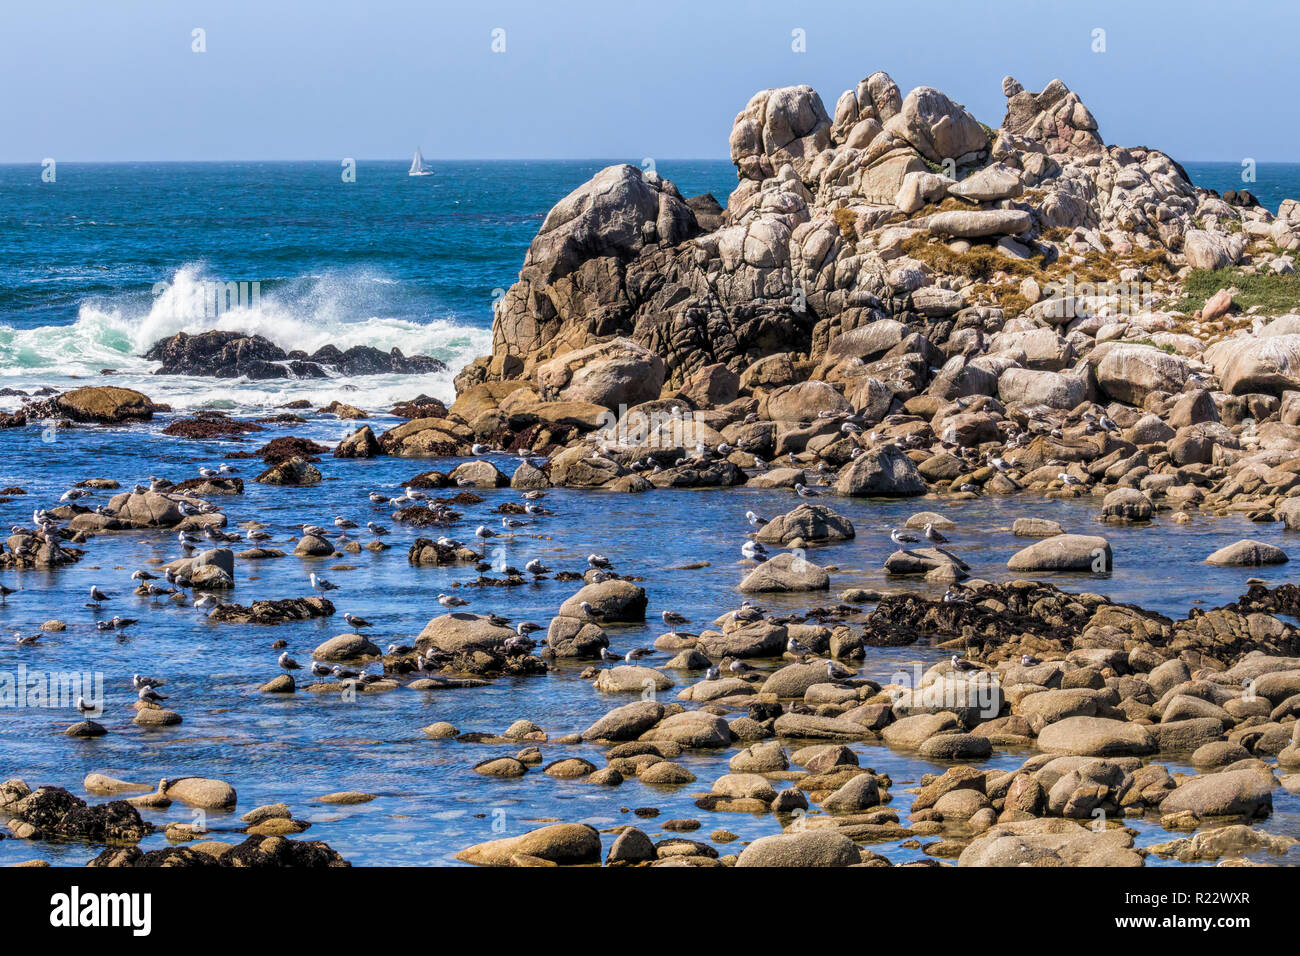 Seagulls rest on rocks surrounded by tide pools as ocean waves crash and a sailboat is seen in the background on the coast of Pacific Grove, Californi Stock Photo